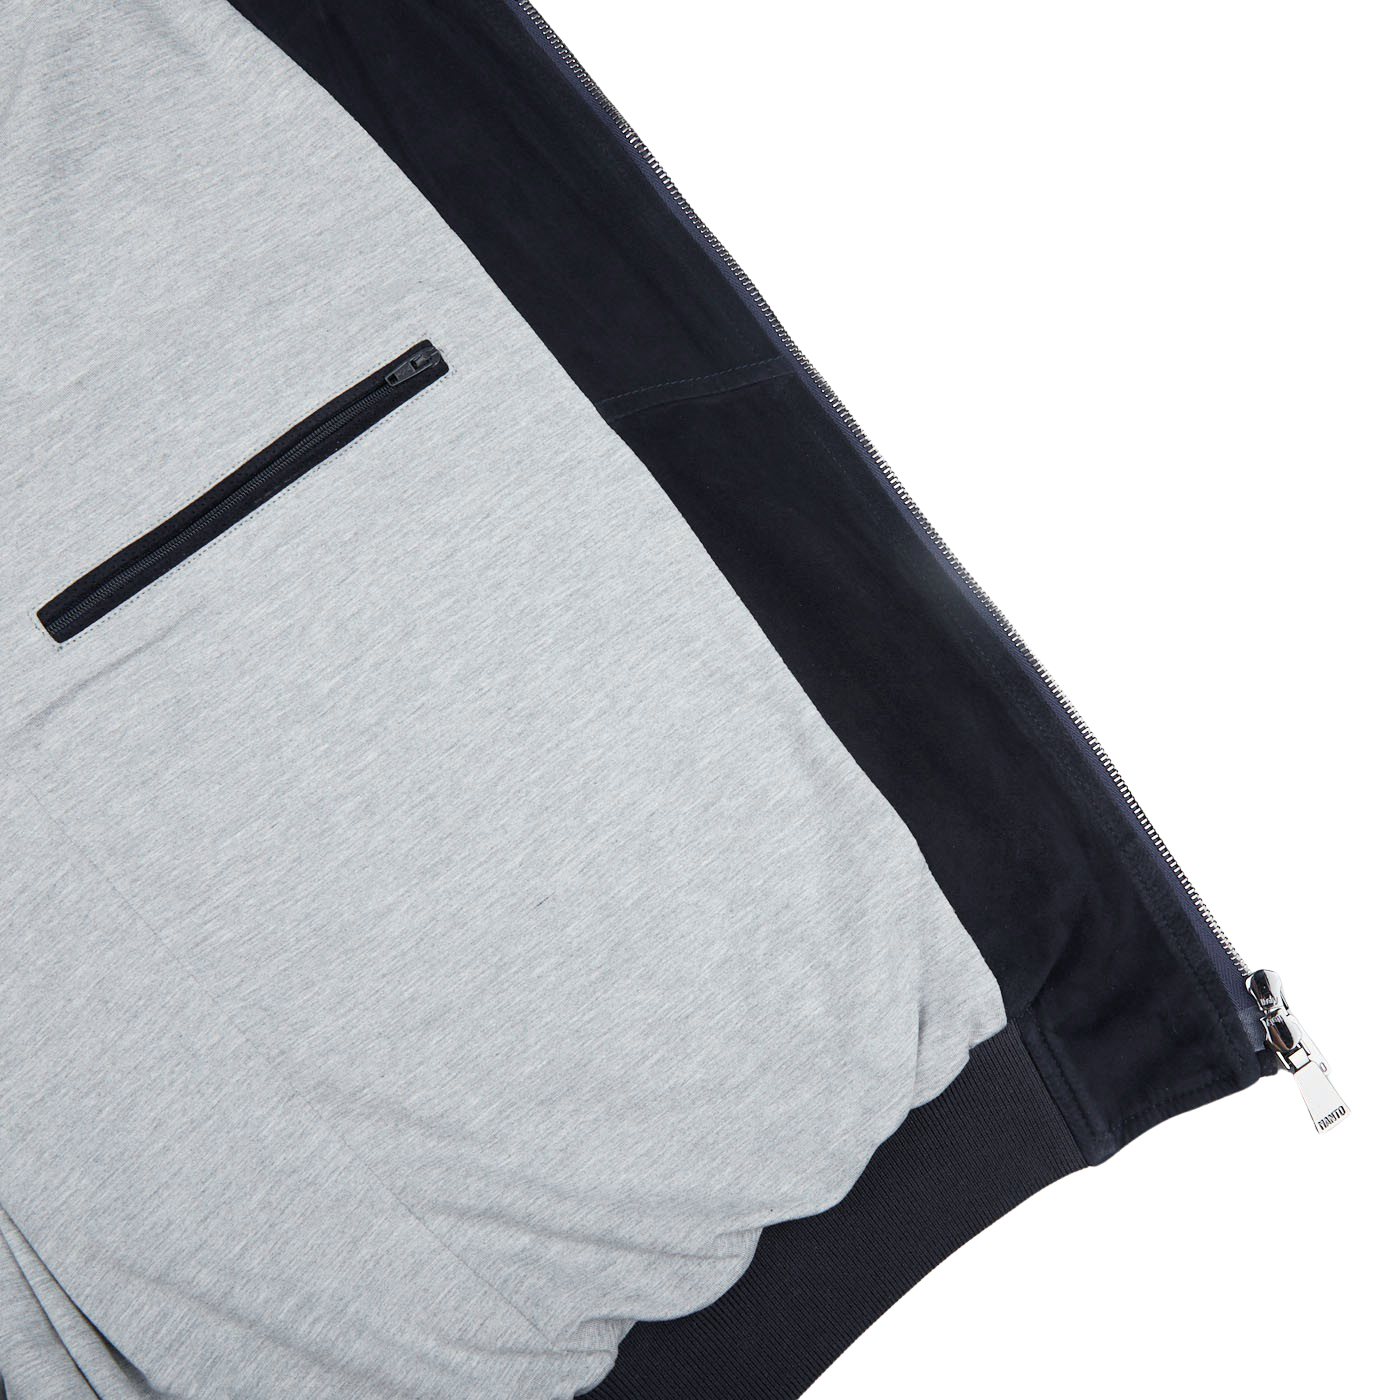 A Manto navy blue sweatpants with a pocket on the side.